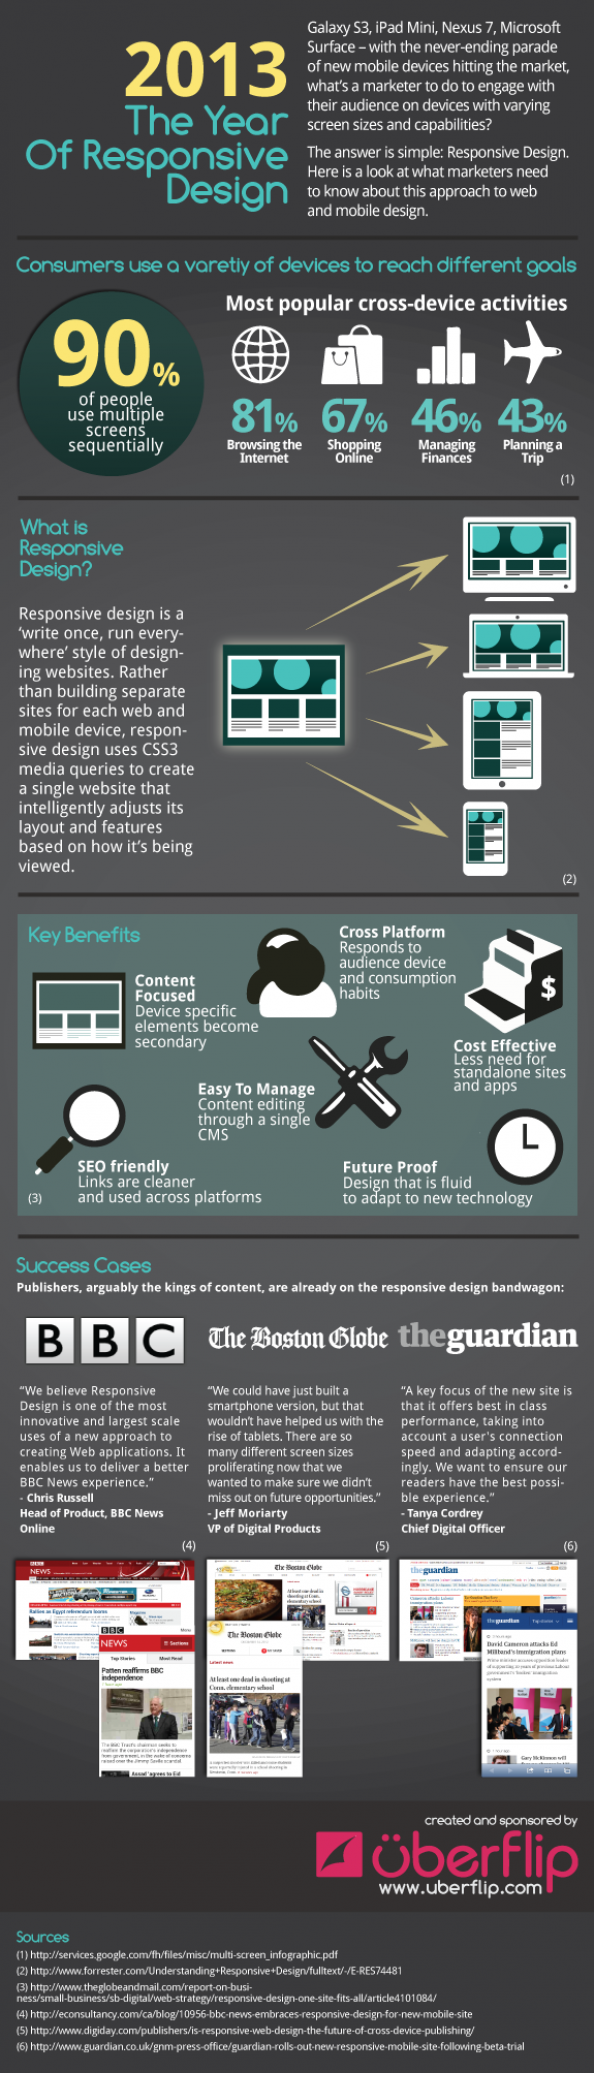 infographic-2013-the-year-of-responsive-design